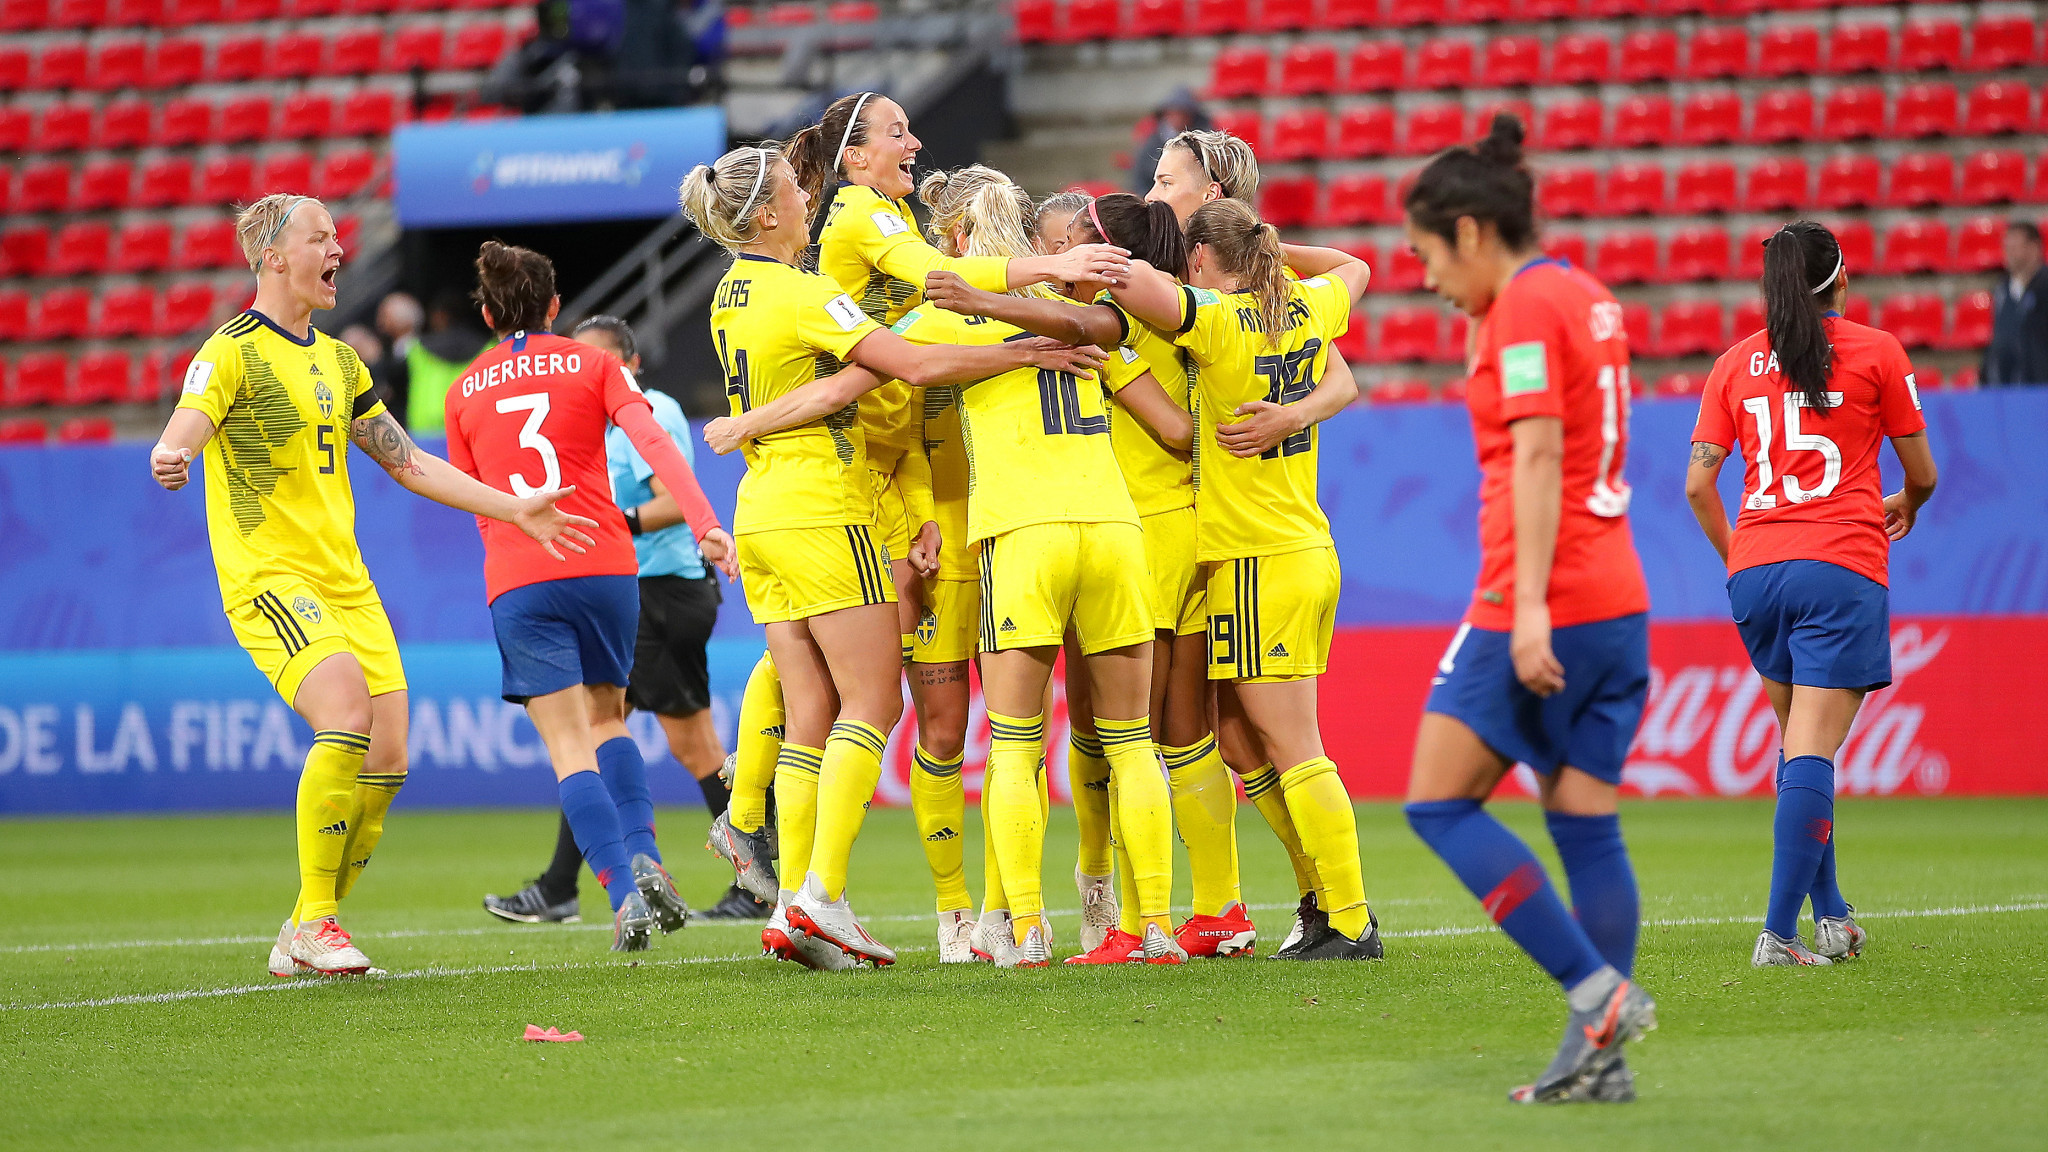 Madelen Janogy then scored to secure a 2-0 victory for Sweden ©Getty Images